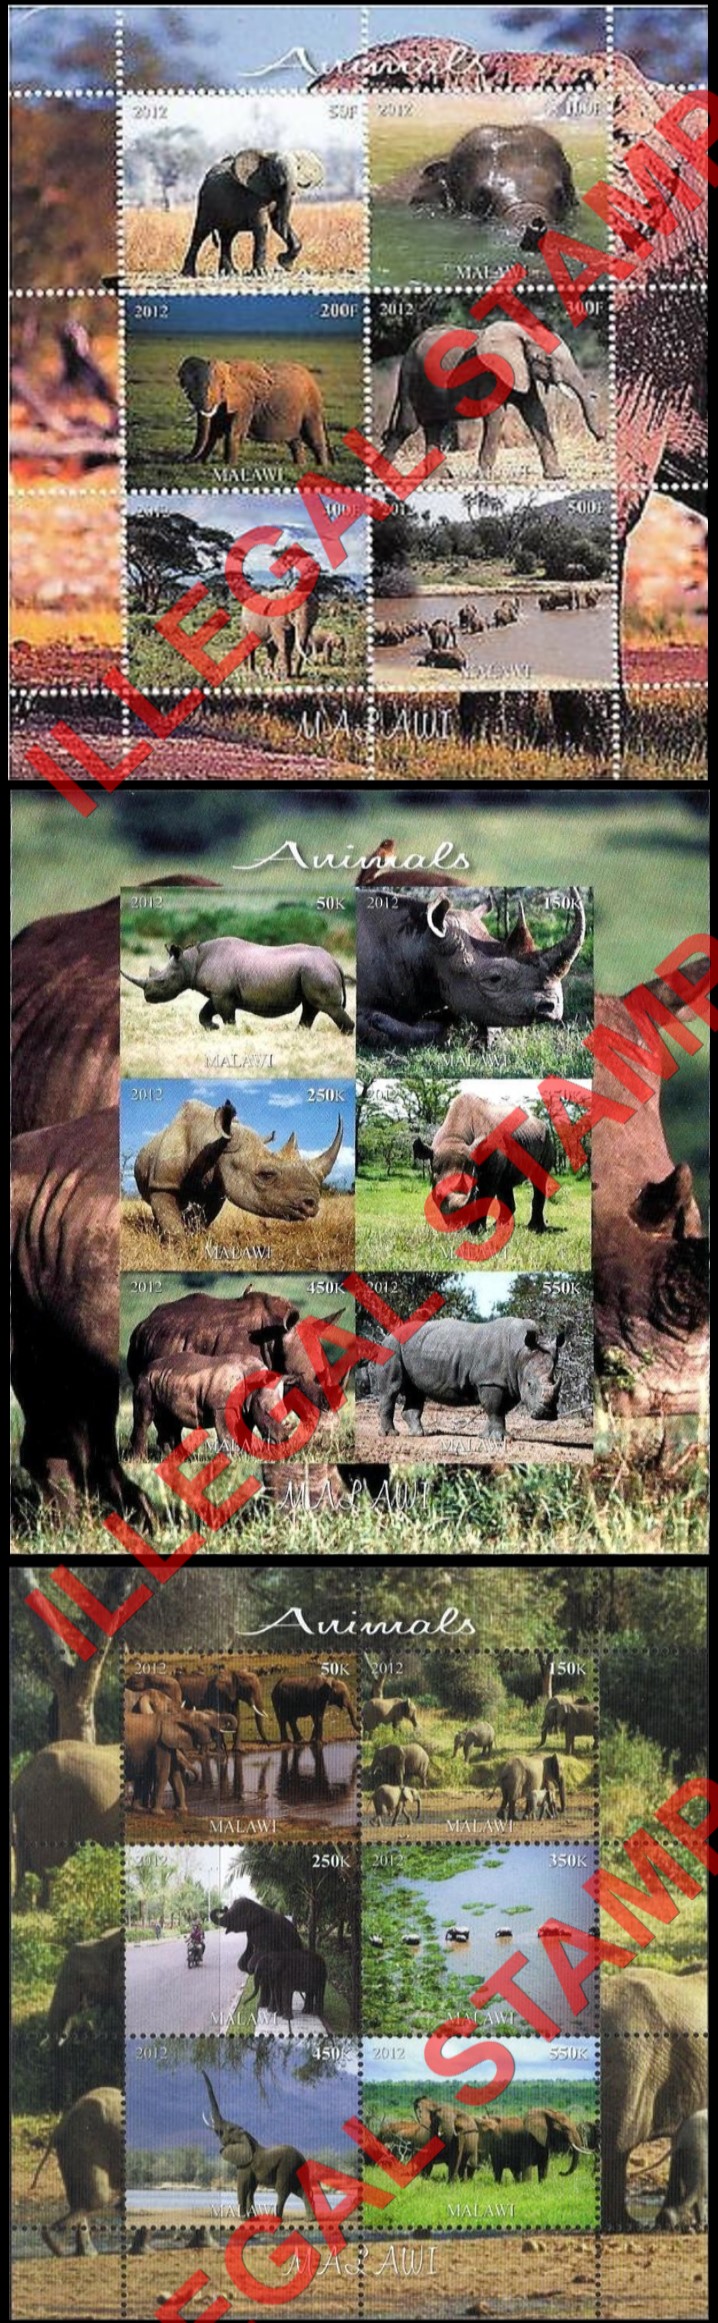 Malawi 2012 Animals Illegal Stamp Souvenir Sheets of 6 (Part 3)